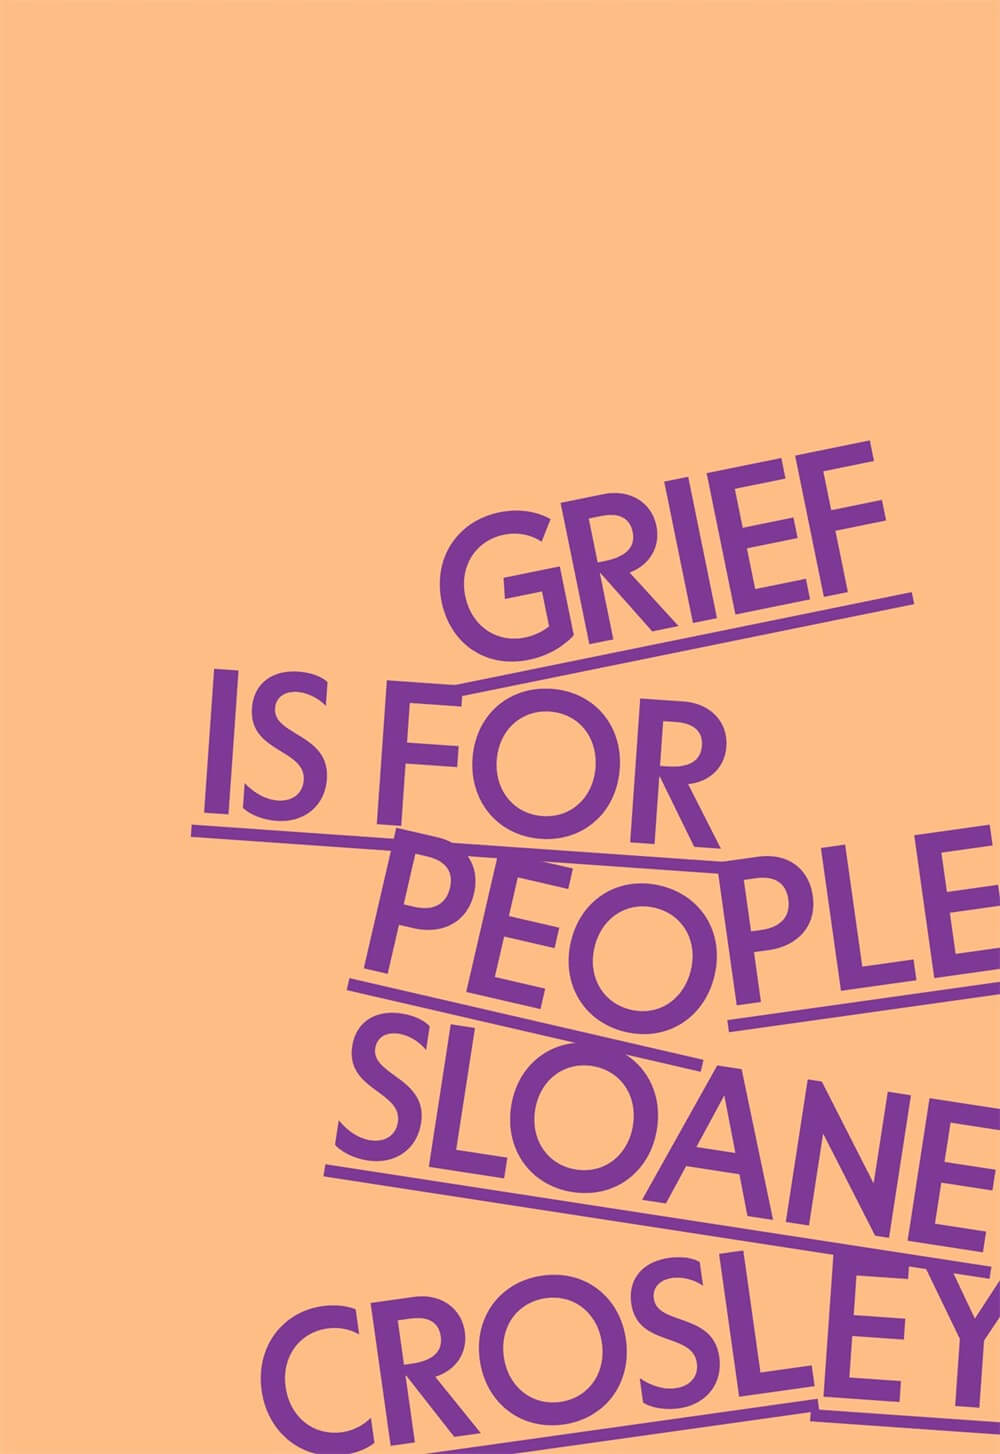 The cover for 'Grief is for People'.